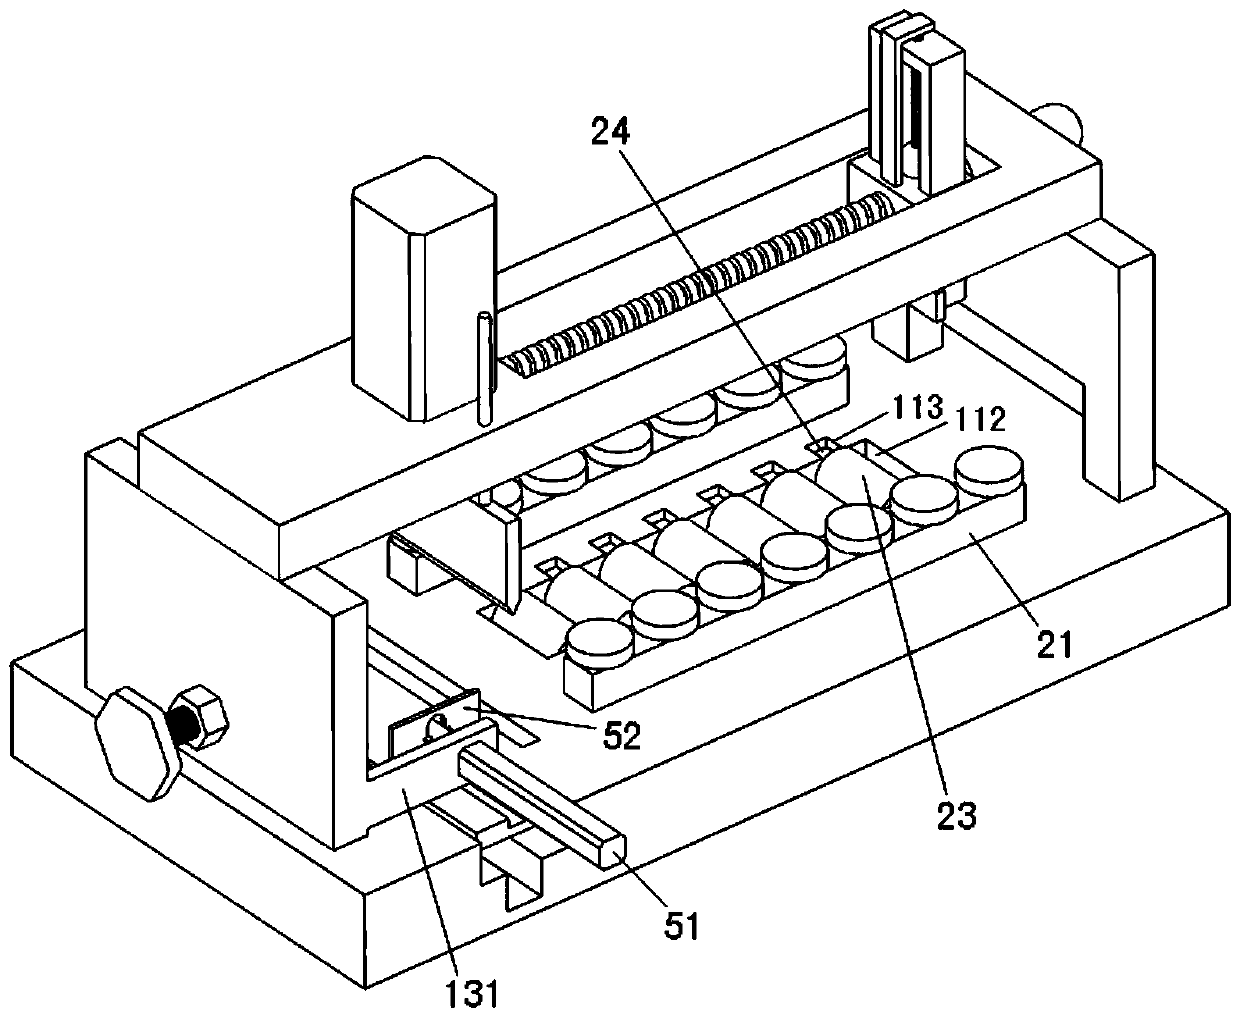 Eraser cutting device with small abrasion on eraser